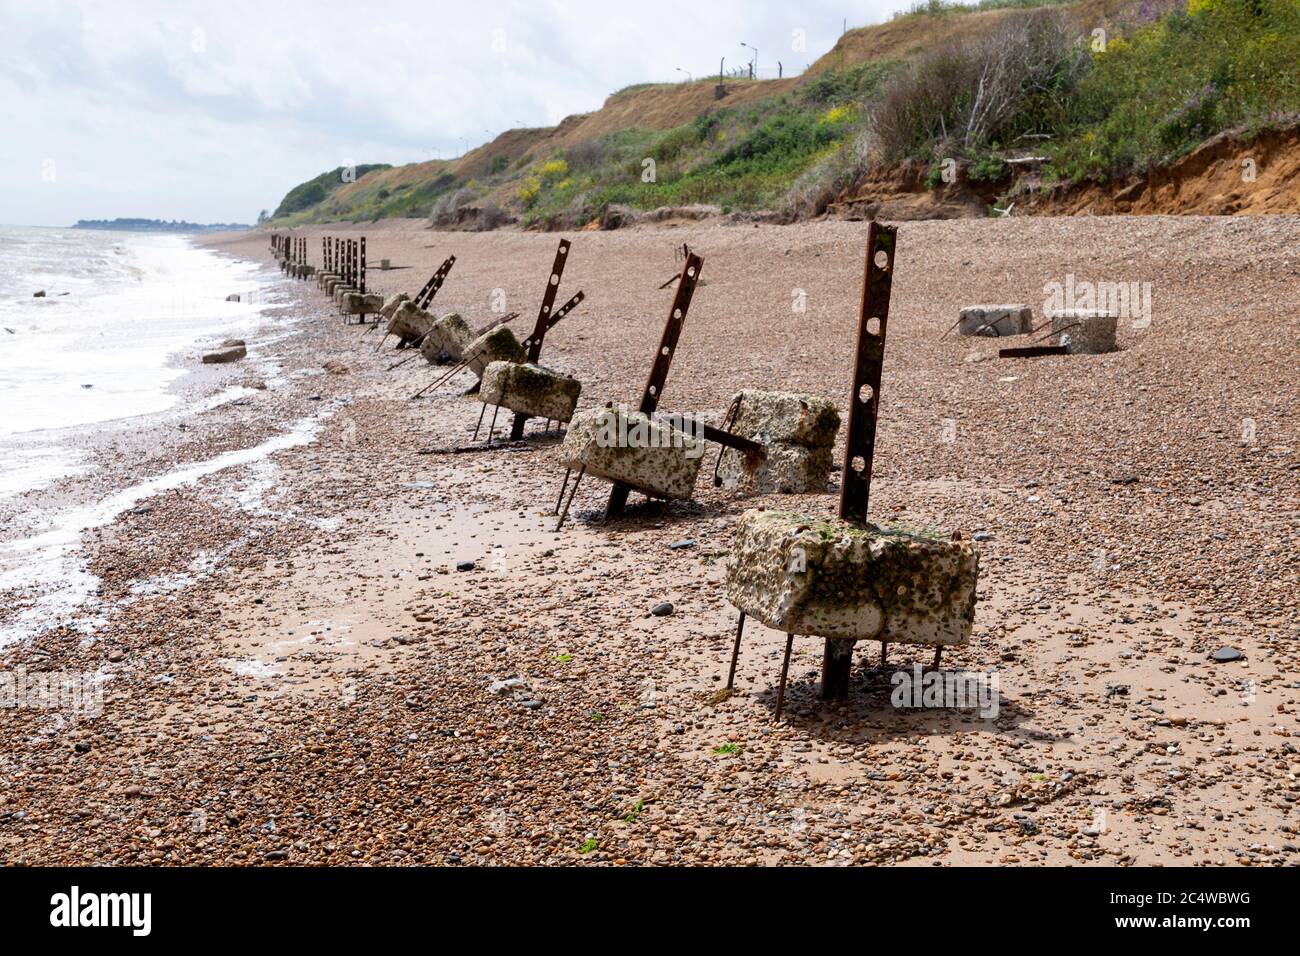 Remnants of old wartime coastal defences 1940s anti-invasion military structures, Bawdsey, Suffolk, England, UK Stock Photo